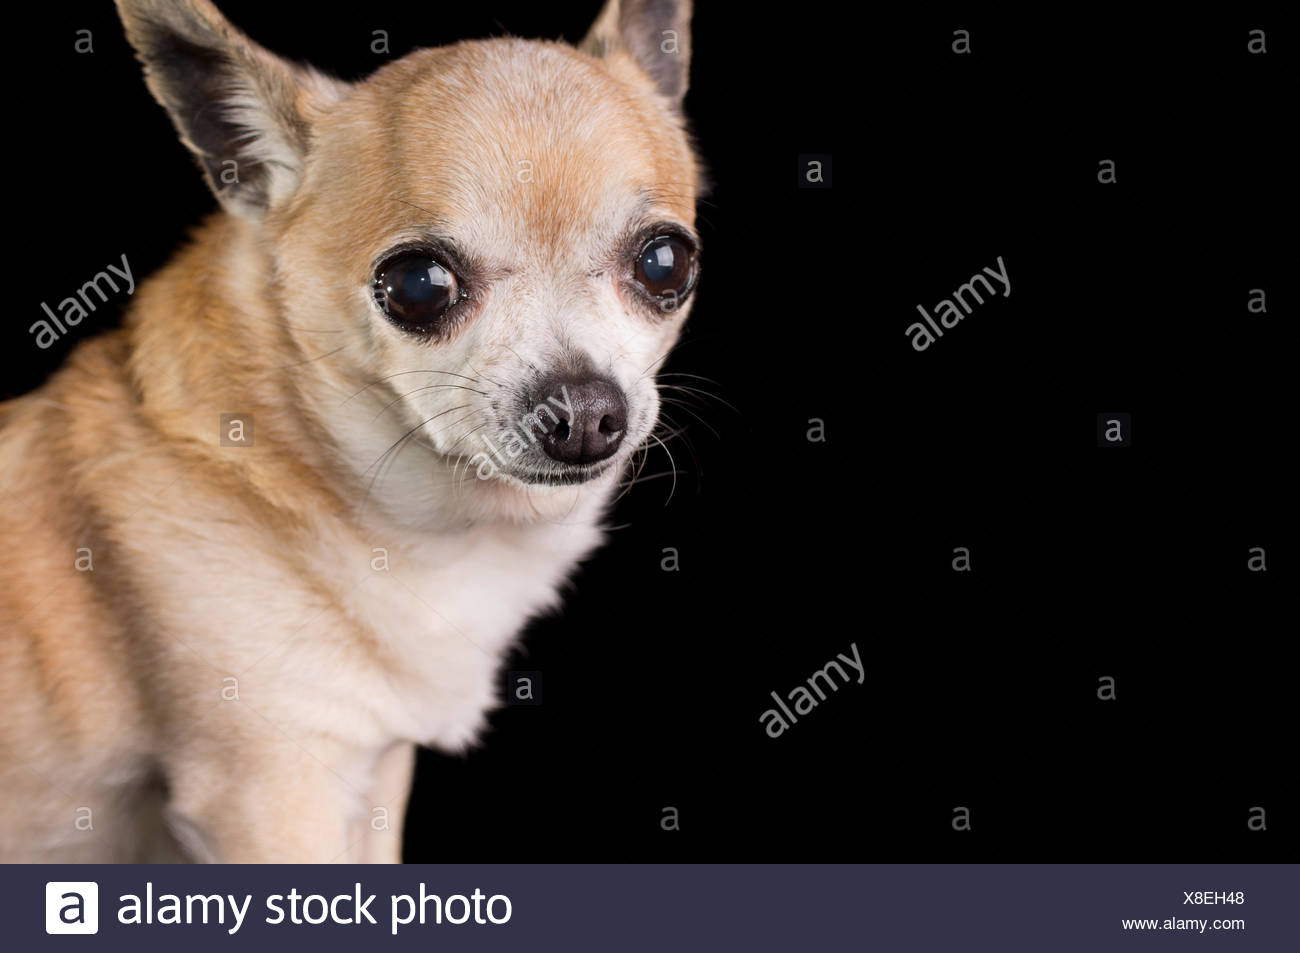 dog with small eyes